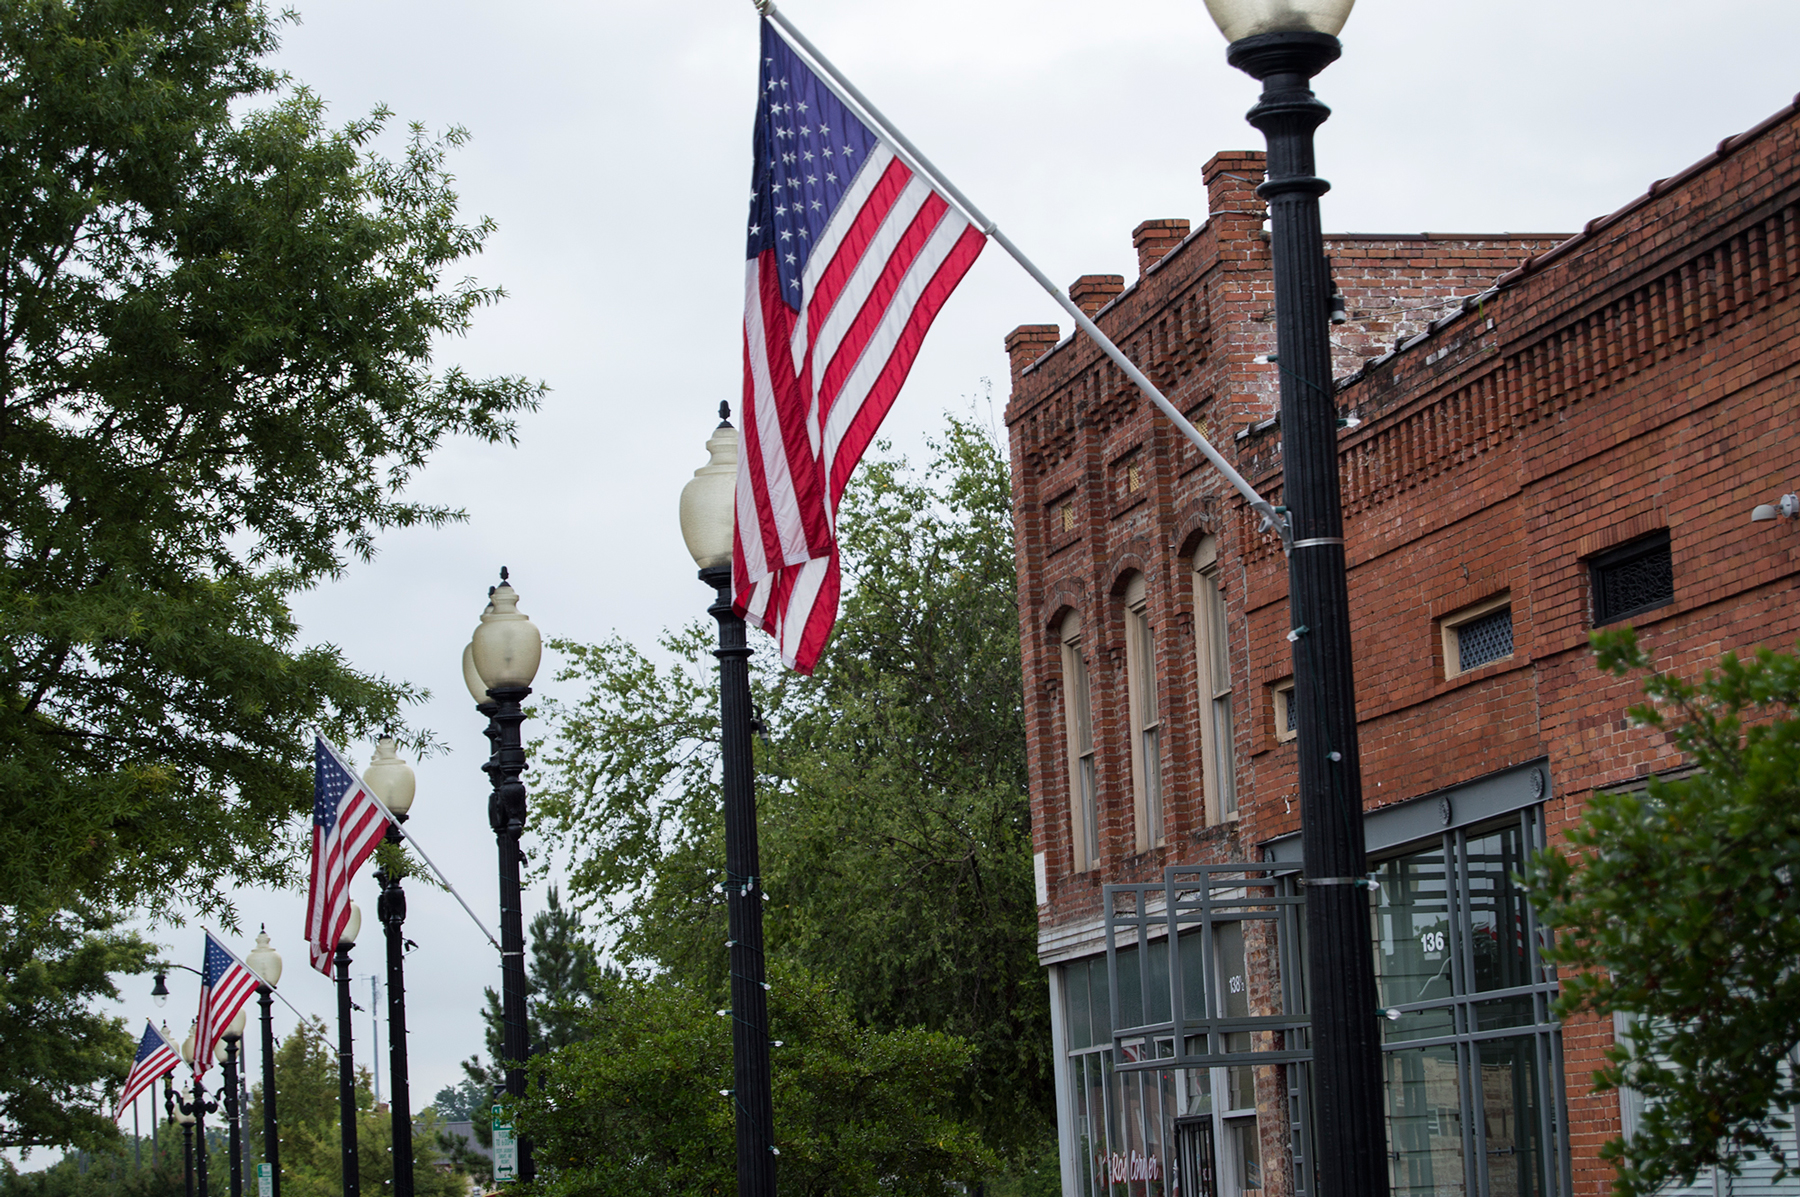 A row of flags greets pedestrians on Person Street in downtown Fayetteville, home to a considerable population of active duty military personnel and veterans. (Michael Olinger/News21)